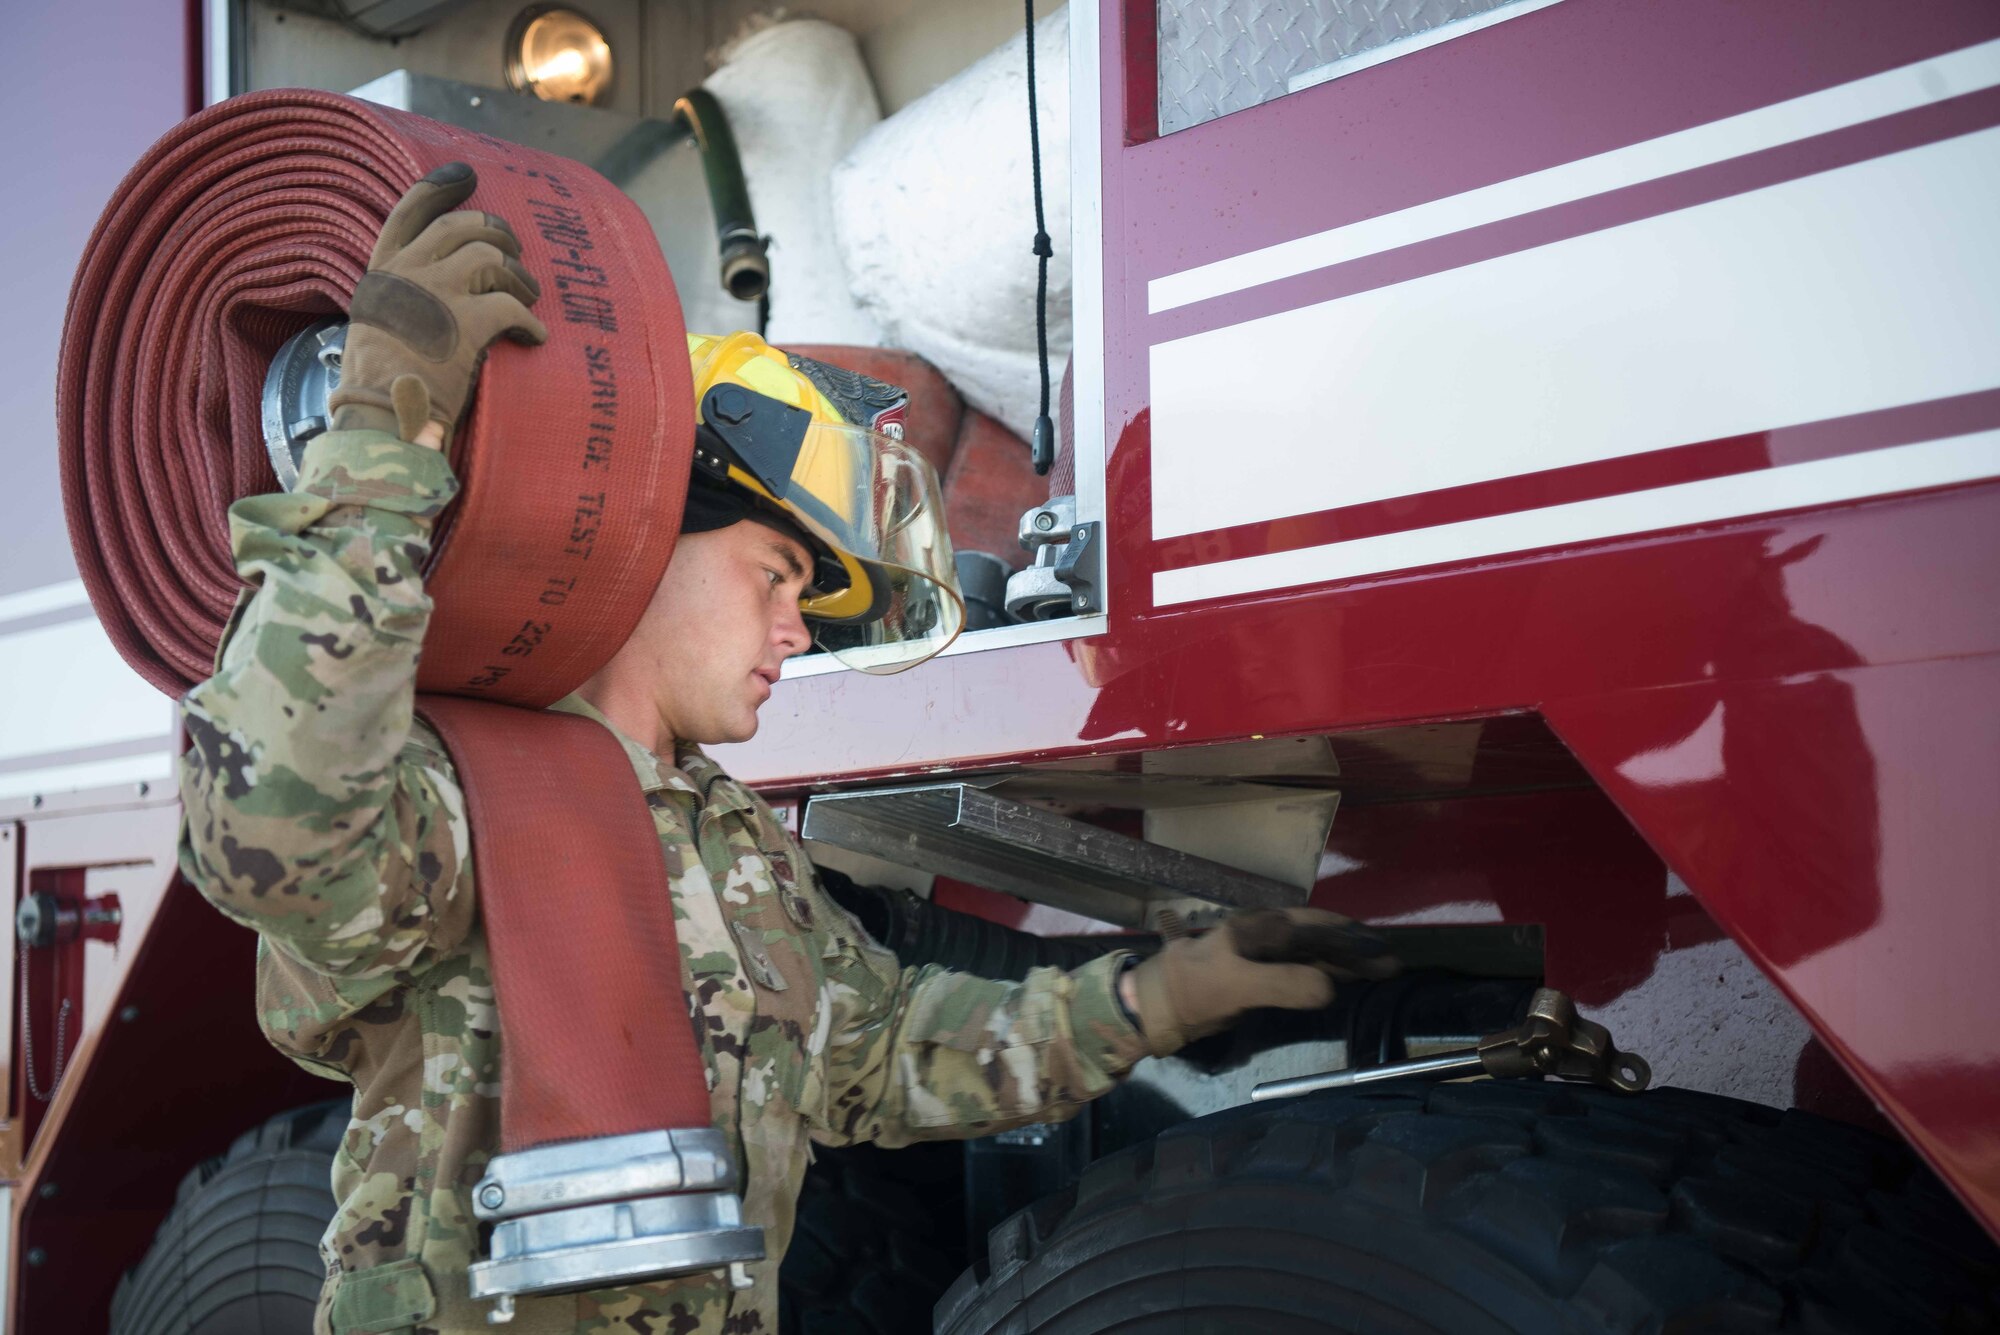 Airman 1st Class Jeff Farrell, 22nd Civil Engineer Squadron fire protection apprentice, prepares to refill the water tank on an aerospace protection aircraft rescue firetruck Aug. 4, 2020, at McConnell Air Force Base, Kansas. The large diameter supply hose that Farrell used is 50 feet long allowing him to fill the AP-23 ARFF truck which can hold up to 3,300 gallons of water. (U.S. Air Force photo by Senior Airman Alexi Bosarge)